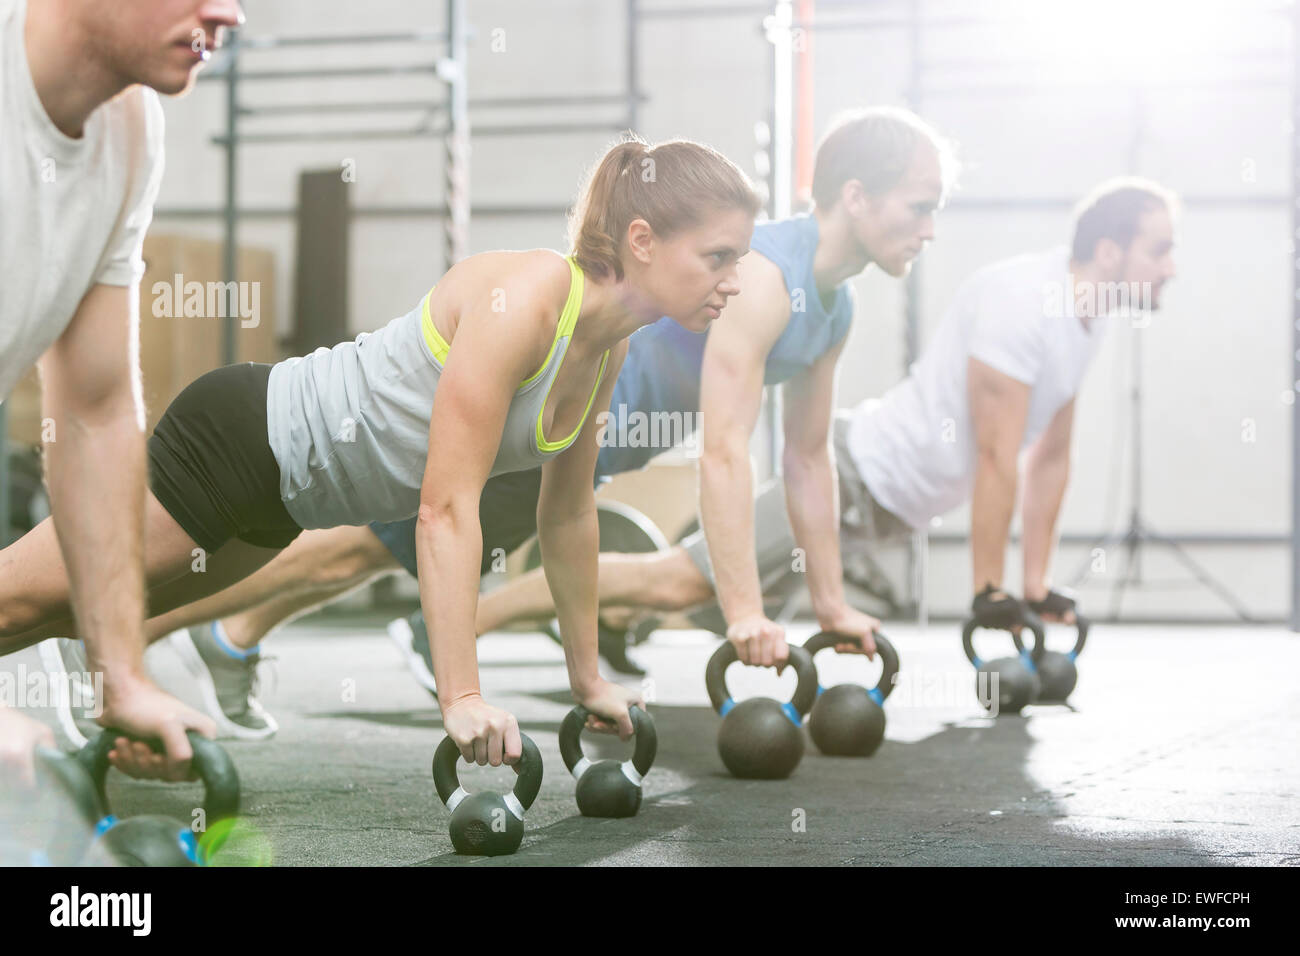 Determined people doing pushups with kettlebells at crossfit gym Stock Photo